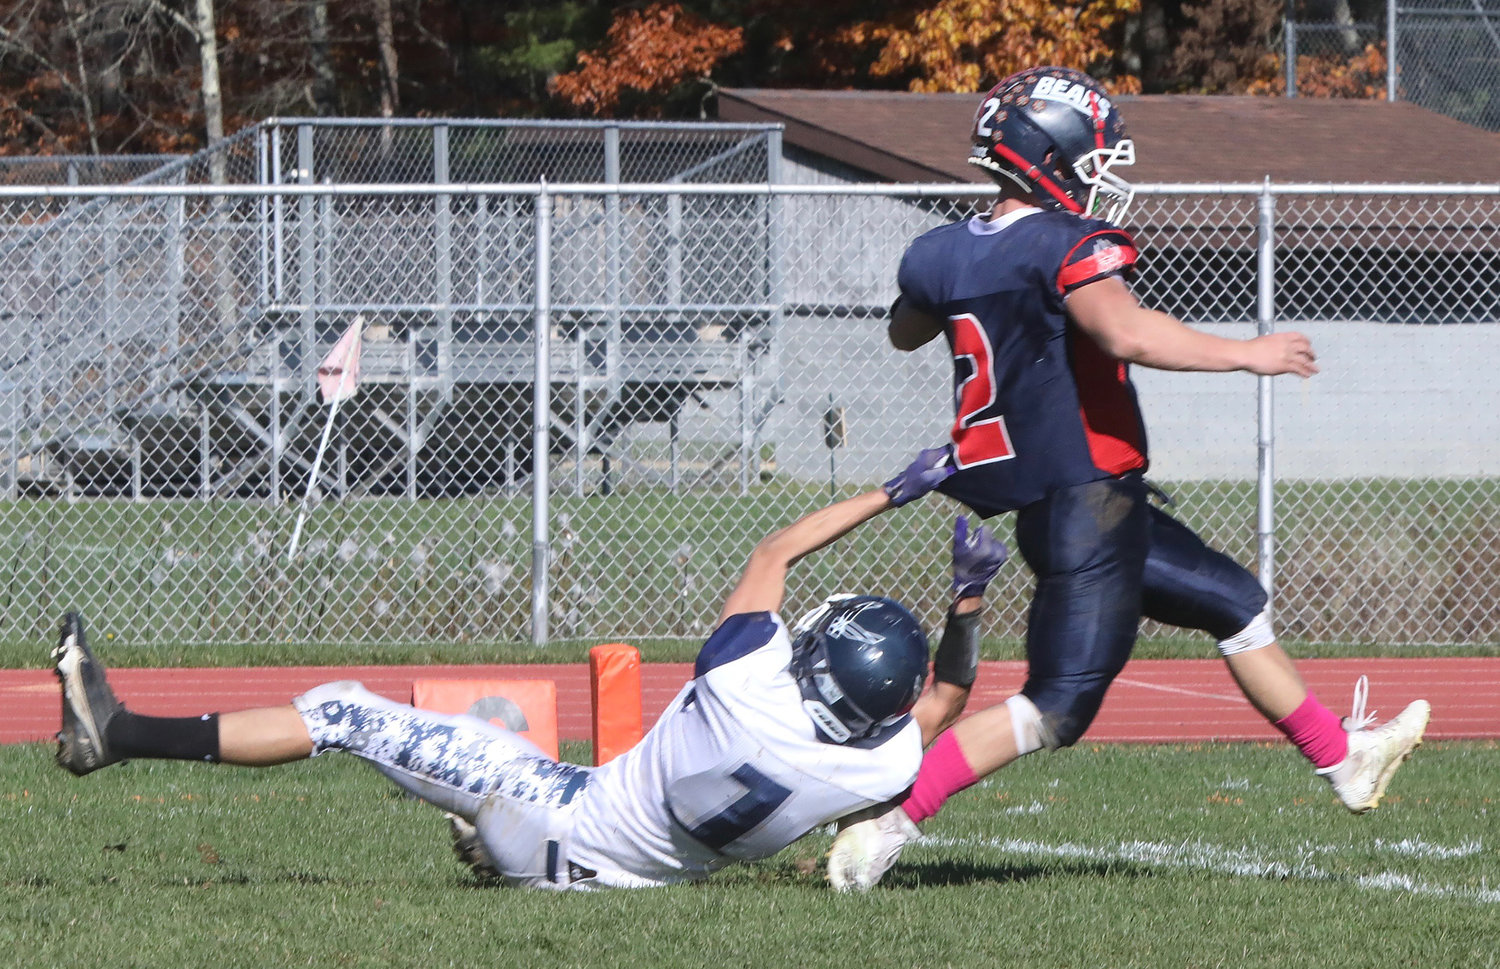 Tri-Valley quarterback Austin Hartman escapes the clutches of Pine Plains Giovanni Ramirez in one of his four TD runs. He also passed for another as the Bears rebounded from their loss against Sullivan West to beat Pine Plains and advance to the semifinals.